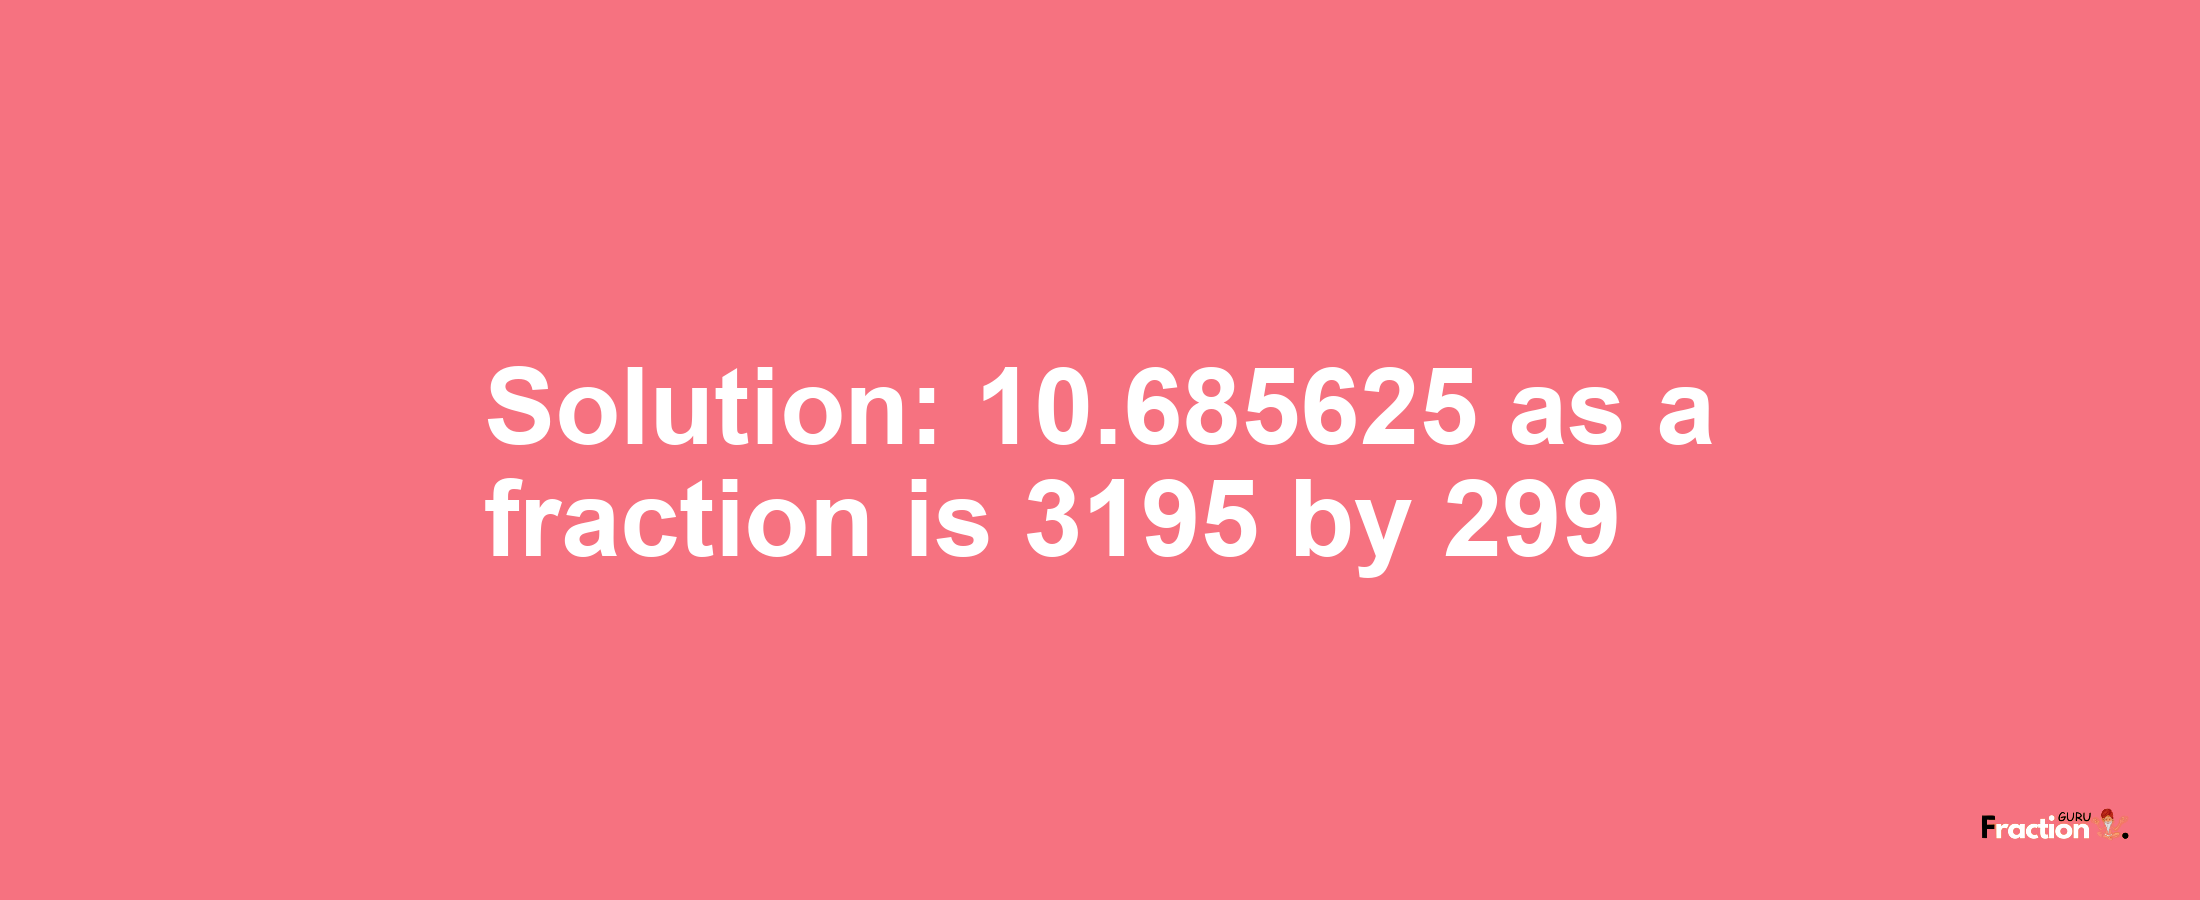 Solution:10.685625 as a fraction is 3195/299